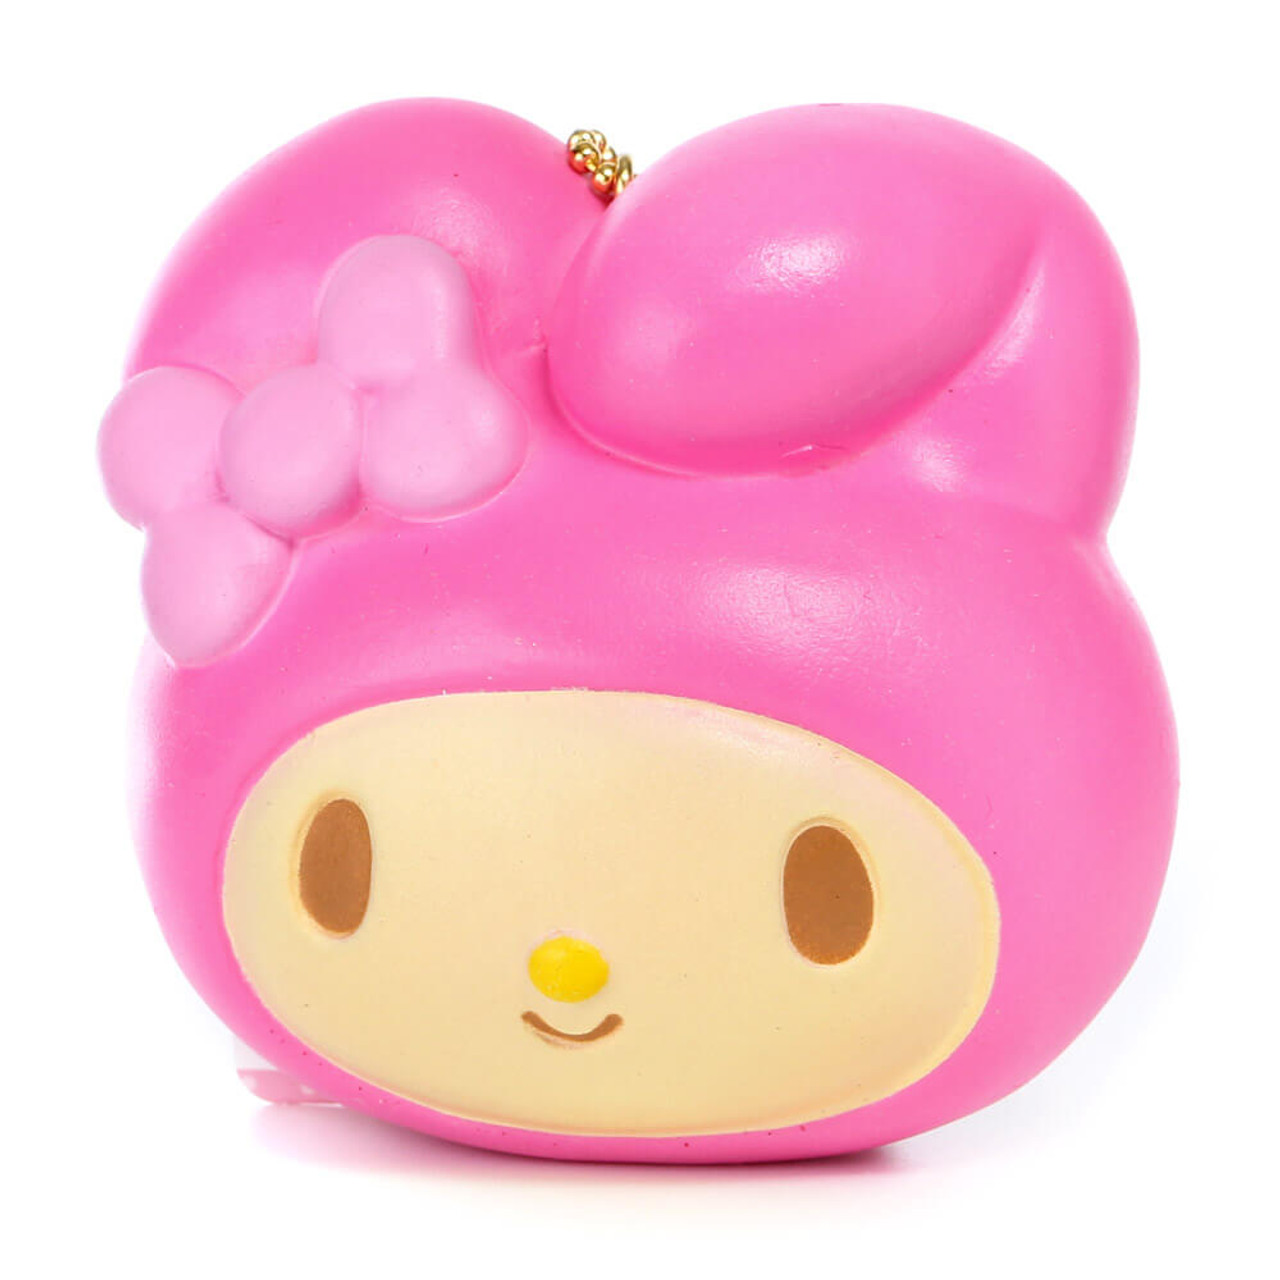 Sanrio My Melody Head Need To Squeeze Soft Squishy Toys with Bead Chain - Classic Pink